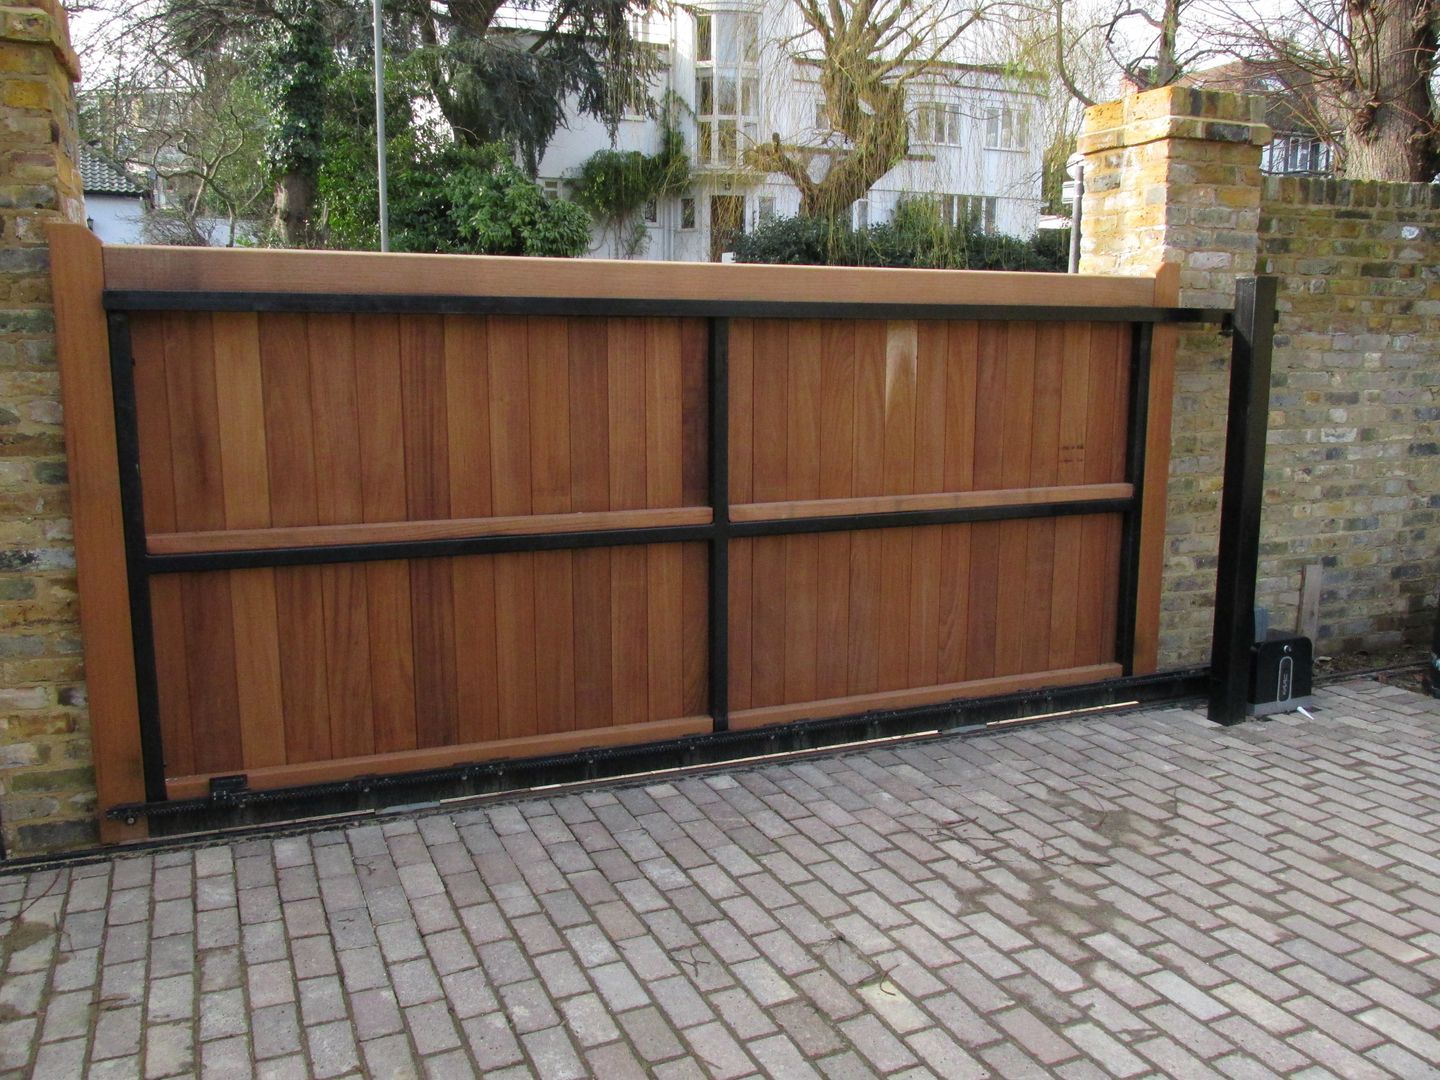 Rear View of Metal Framed, Wooden Boarded Electric Gate Portcullis Electric Gates Mediterranean style garden